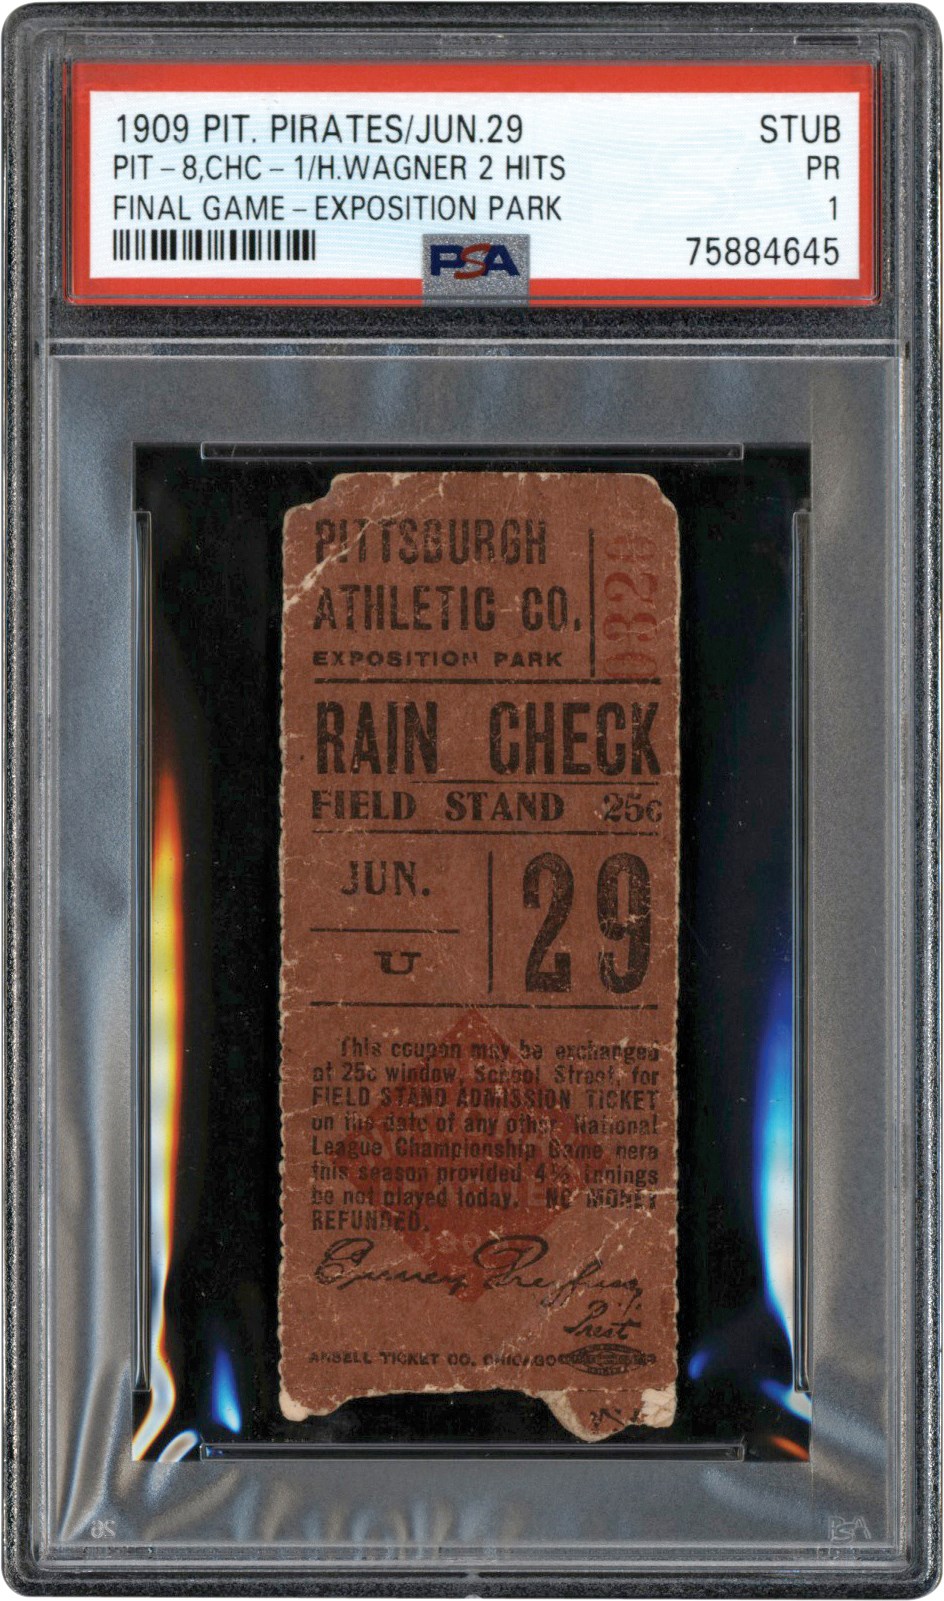 - 1909 Pittsburgh Pirates Last Game at Exposition Park Ticket Stub - Honus Wagner Two Hits - PSA PR 1 (Pop 1 of 1 - Highest Graded)